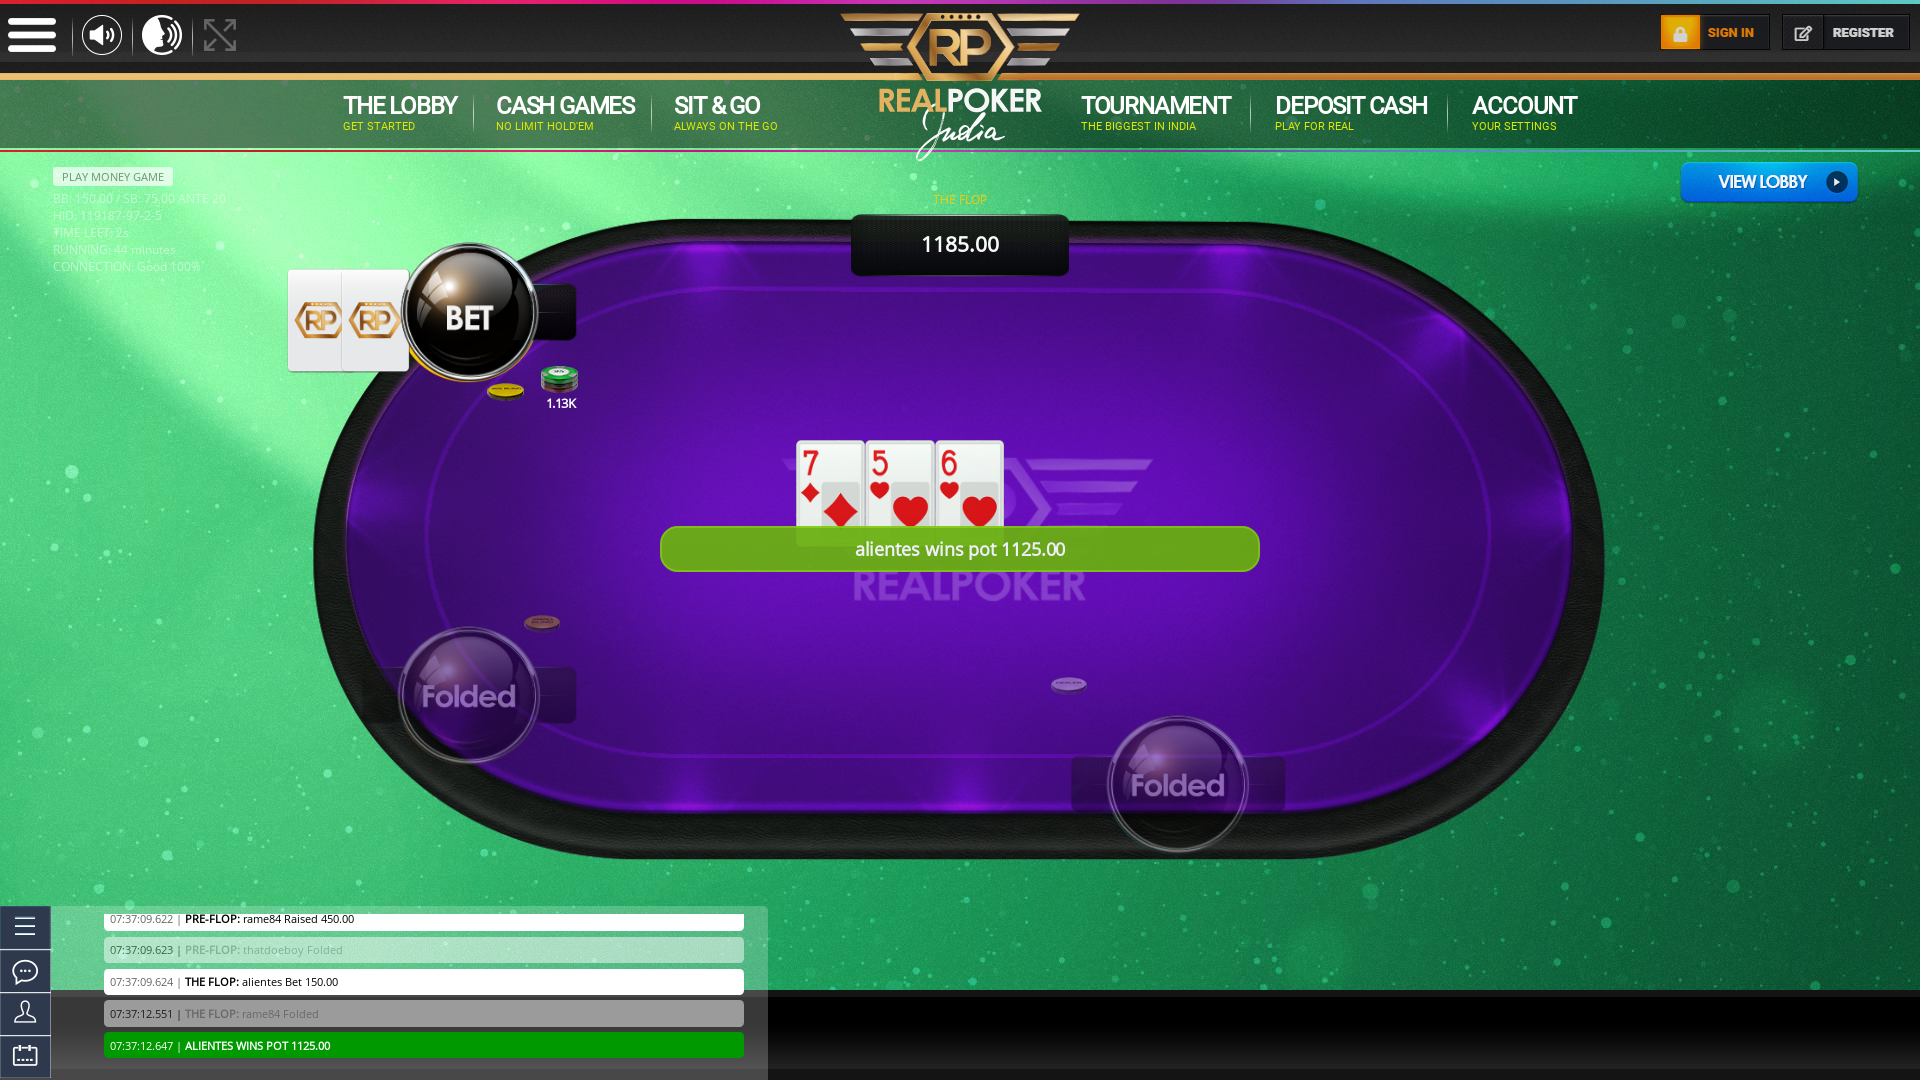 10 player poker in the 44th minute